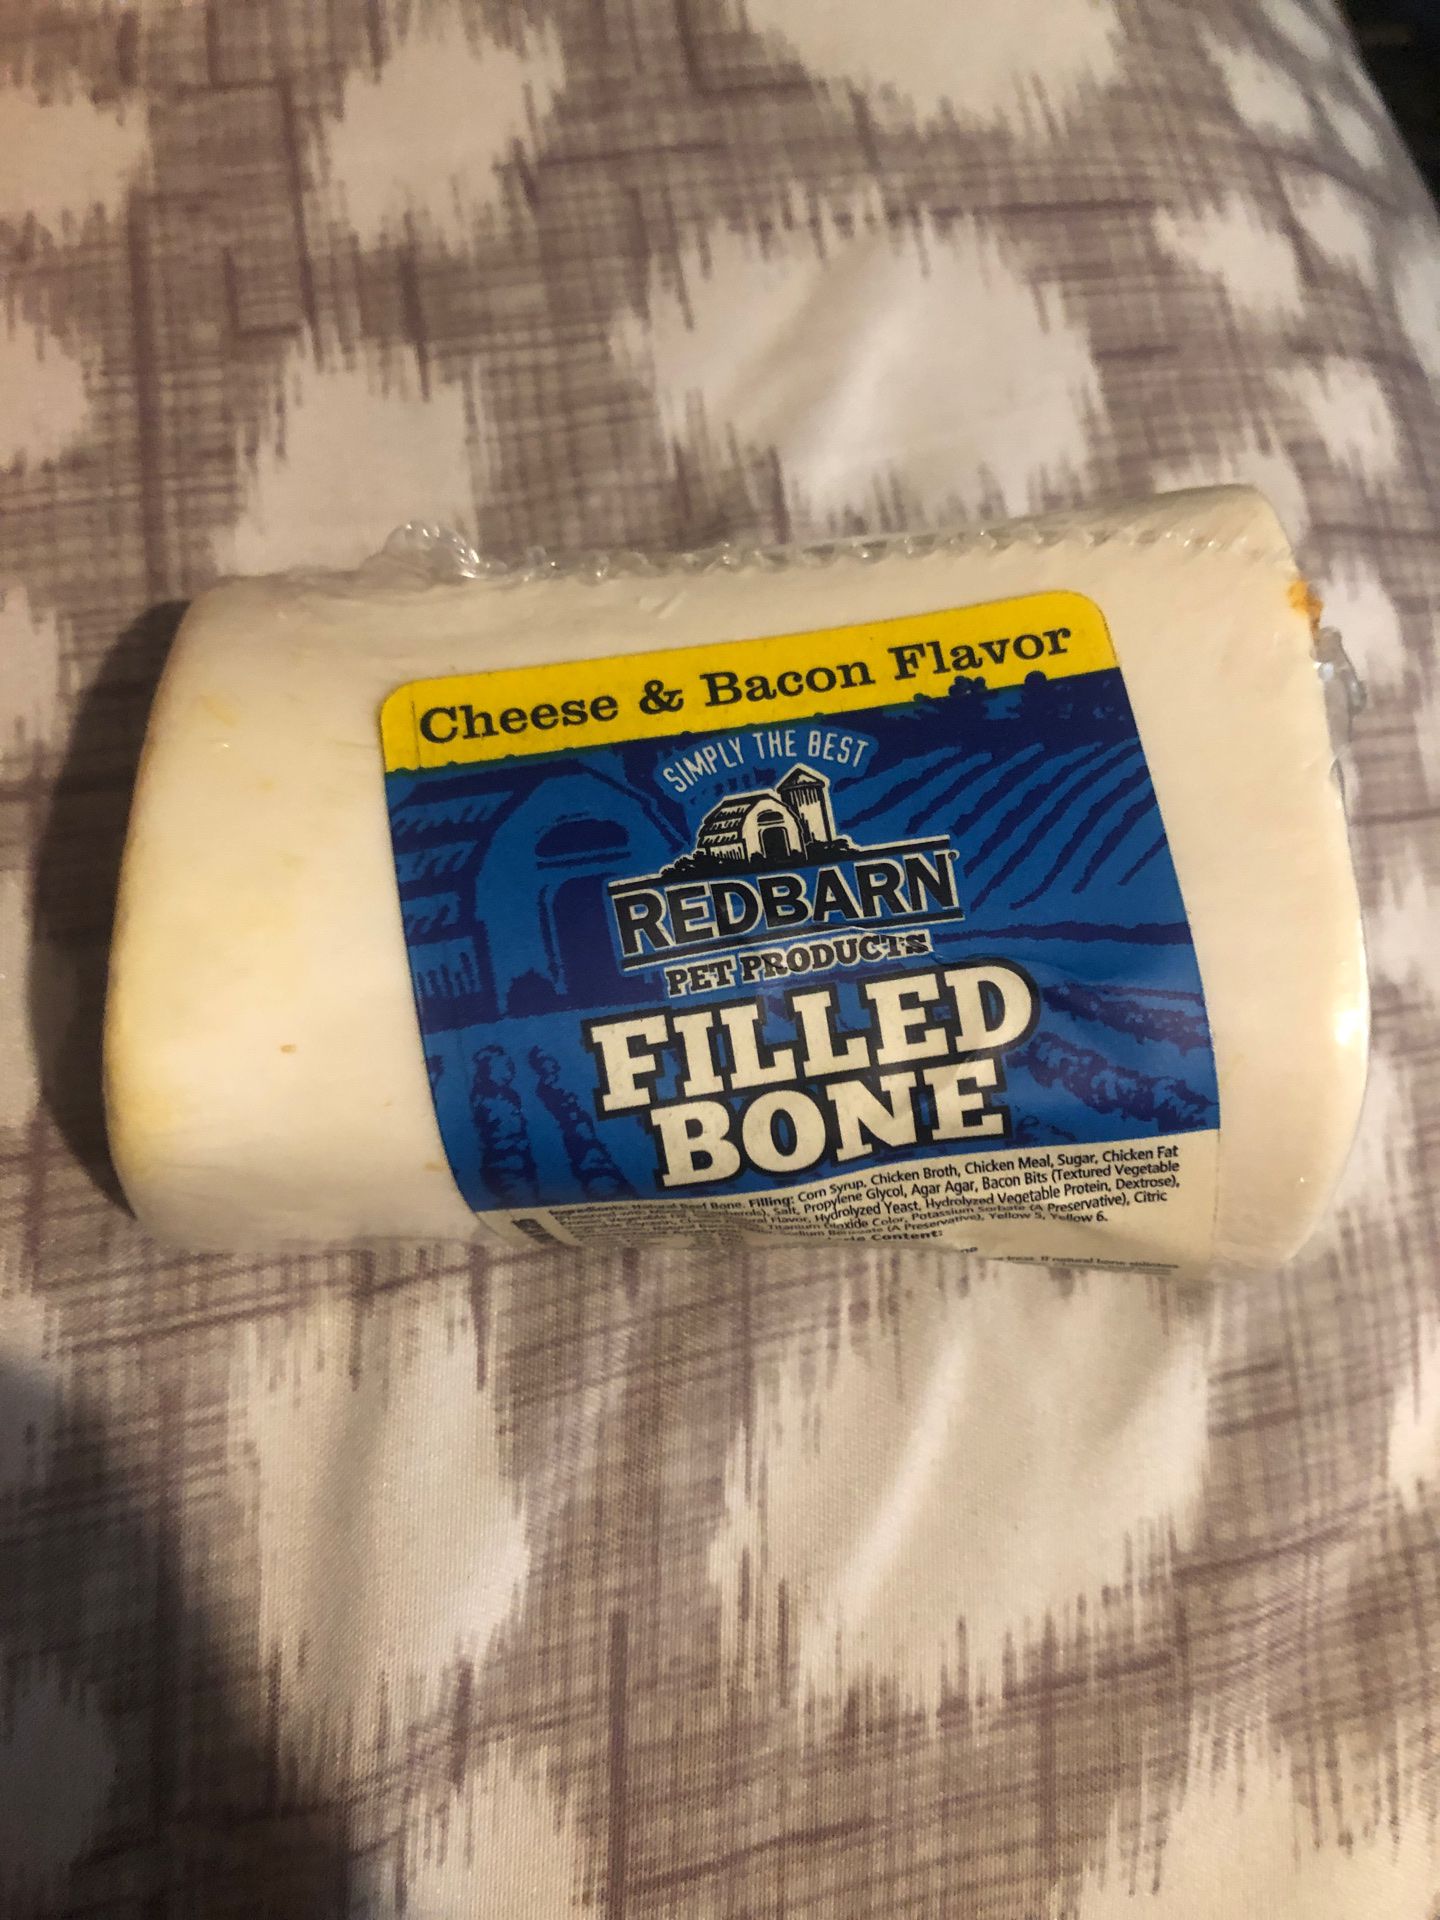 Cheese and bacon filled bone